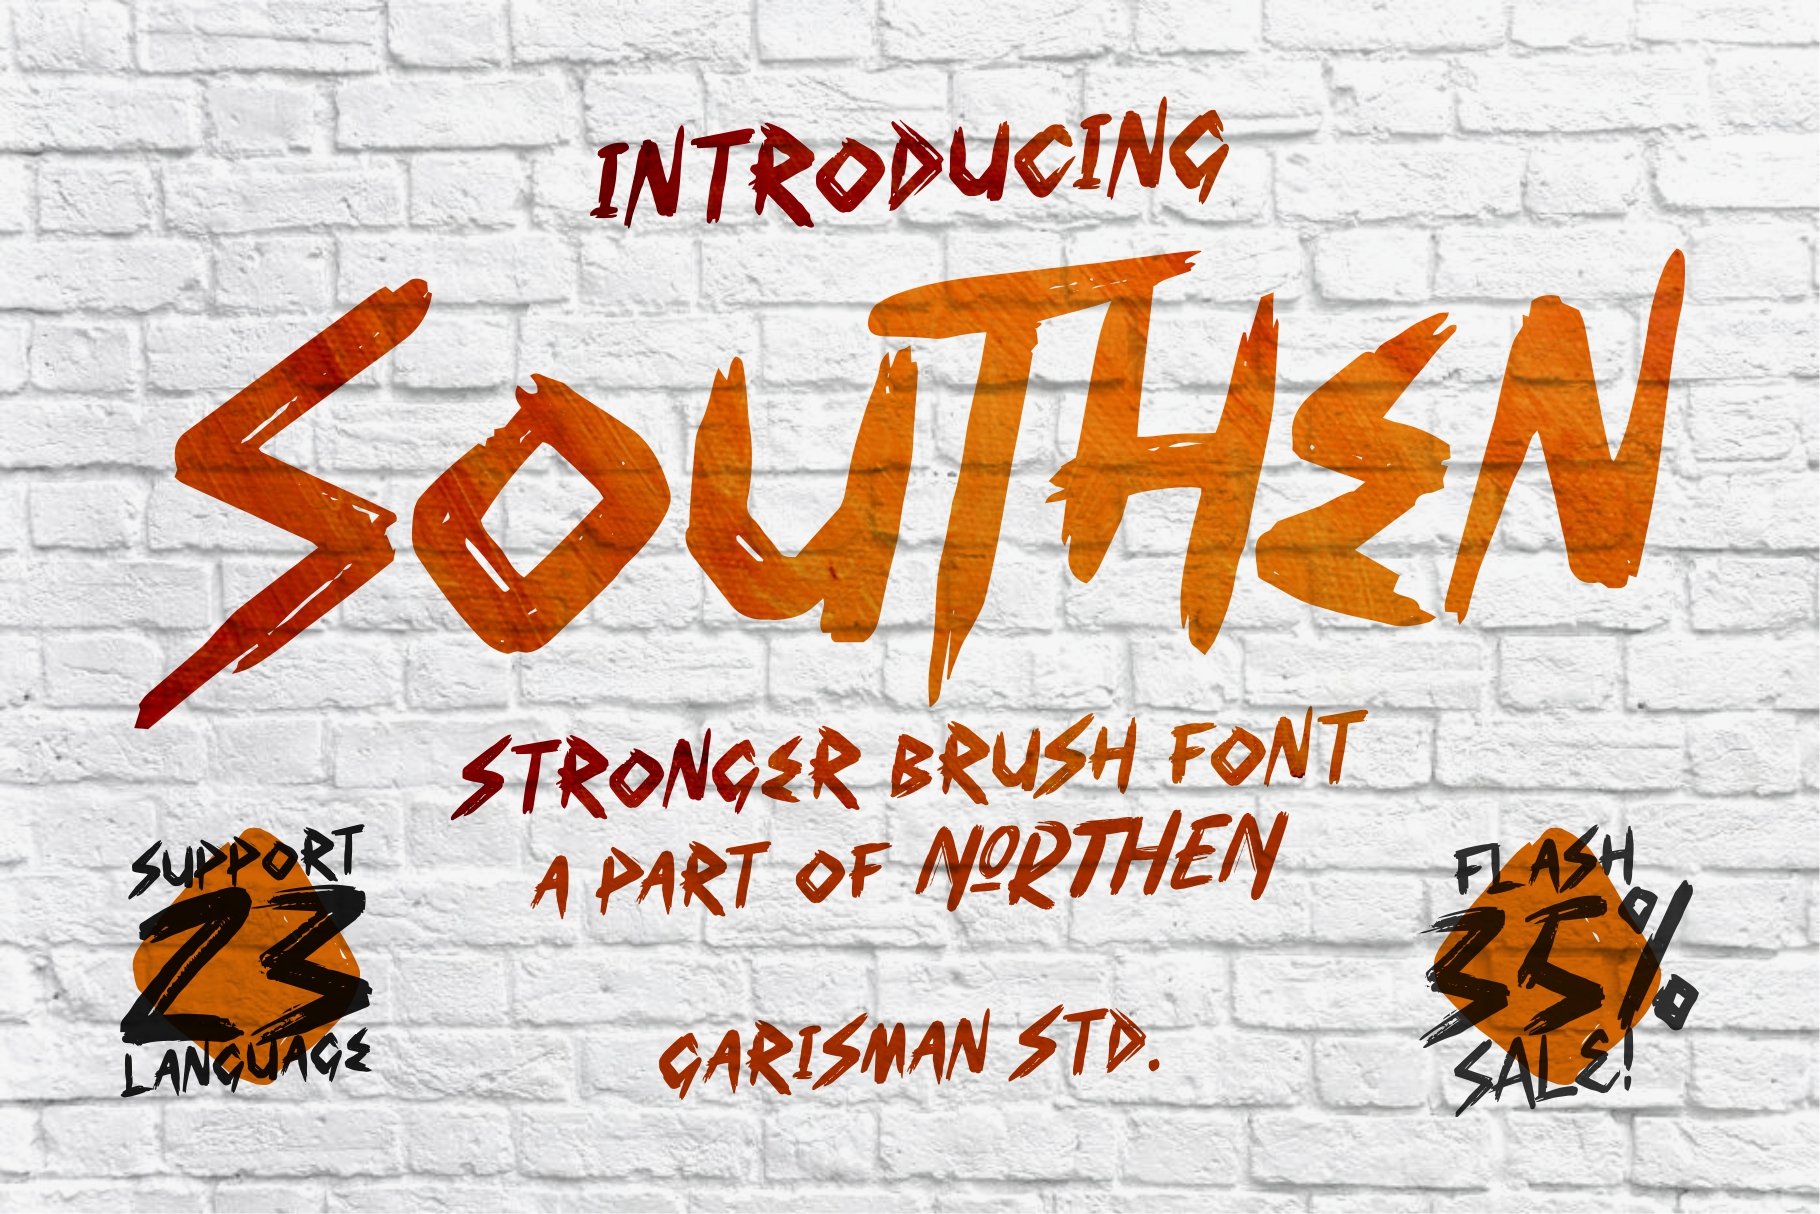 SOUTHEN Brush Fonts cover image.